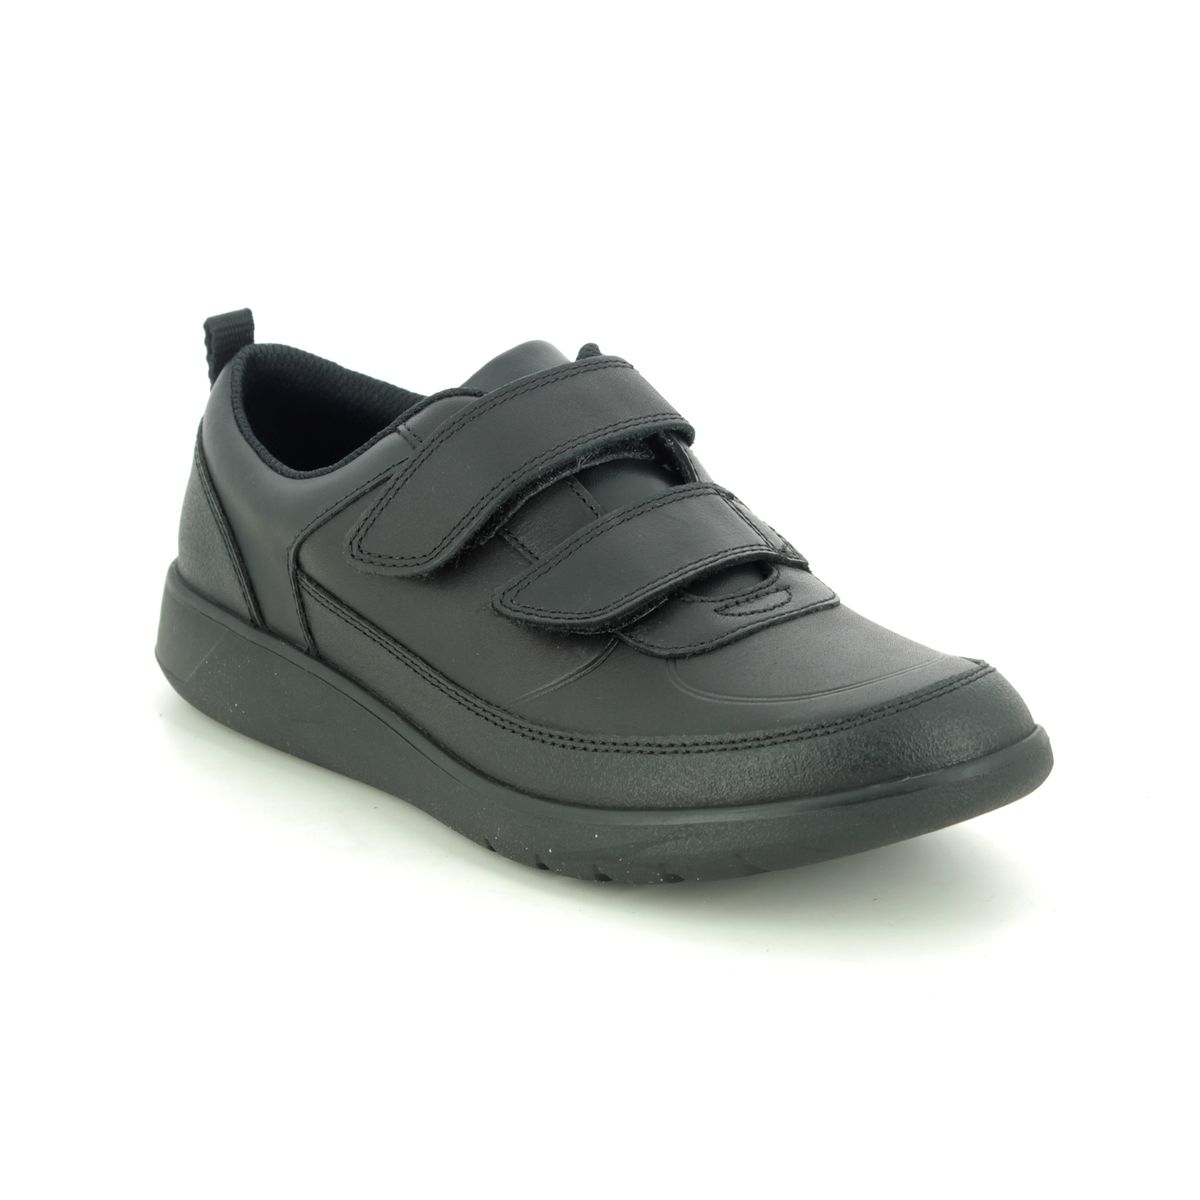 Clarks Scape Flare Y Black Leather Kids Boys Shoes 494096F In Size 3.5 In Plain Black Leather F Width Fitting Regular Fit For School For kids